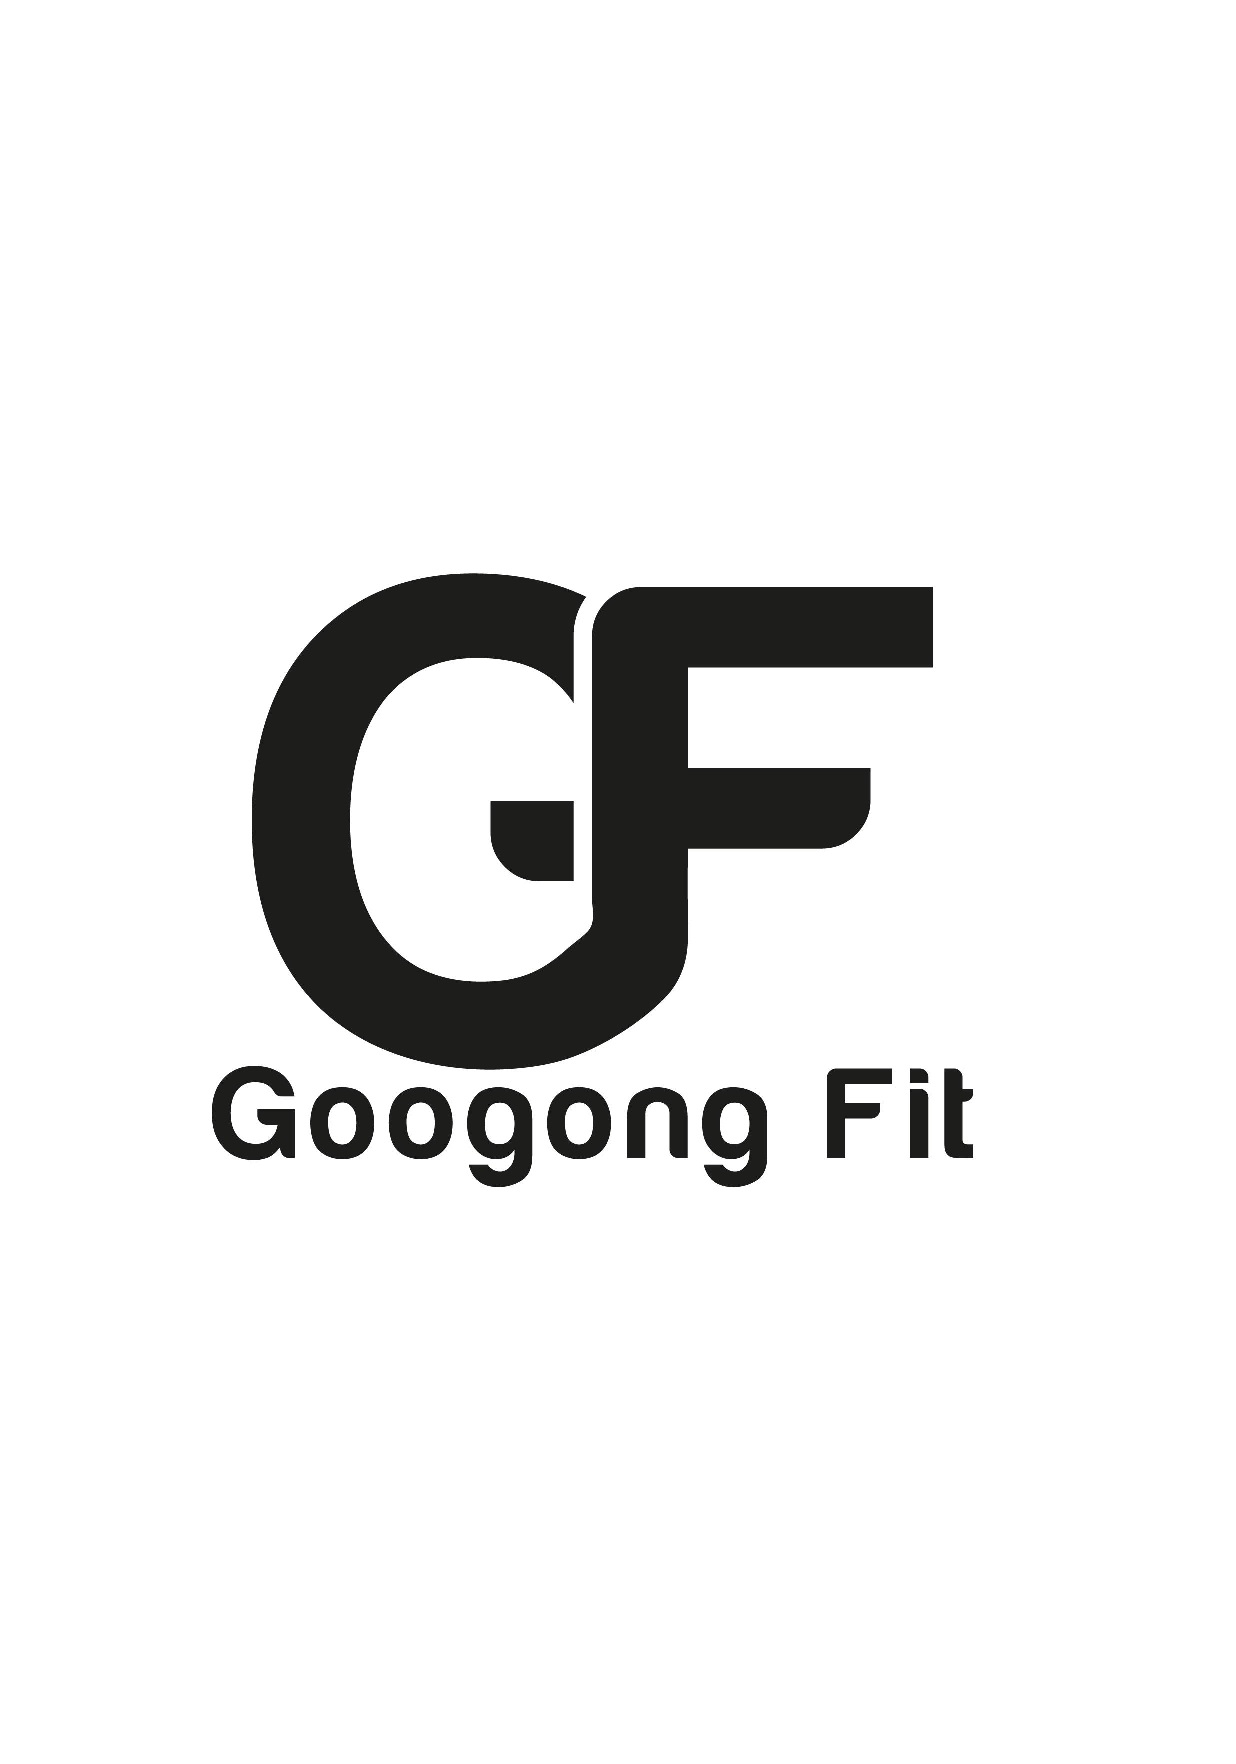 image of Googong Fit